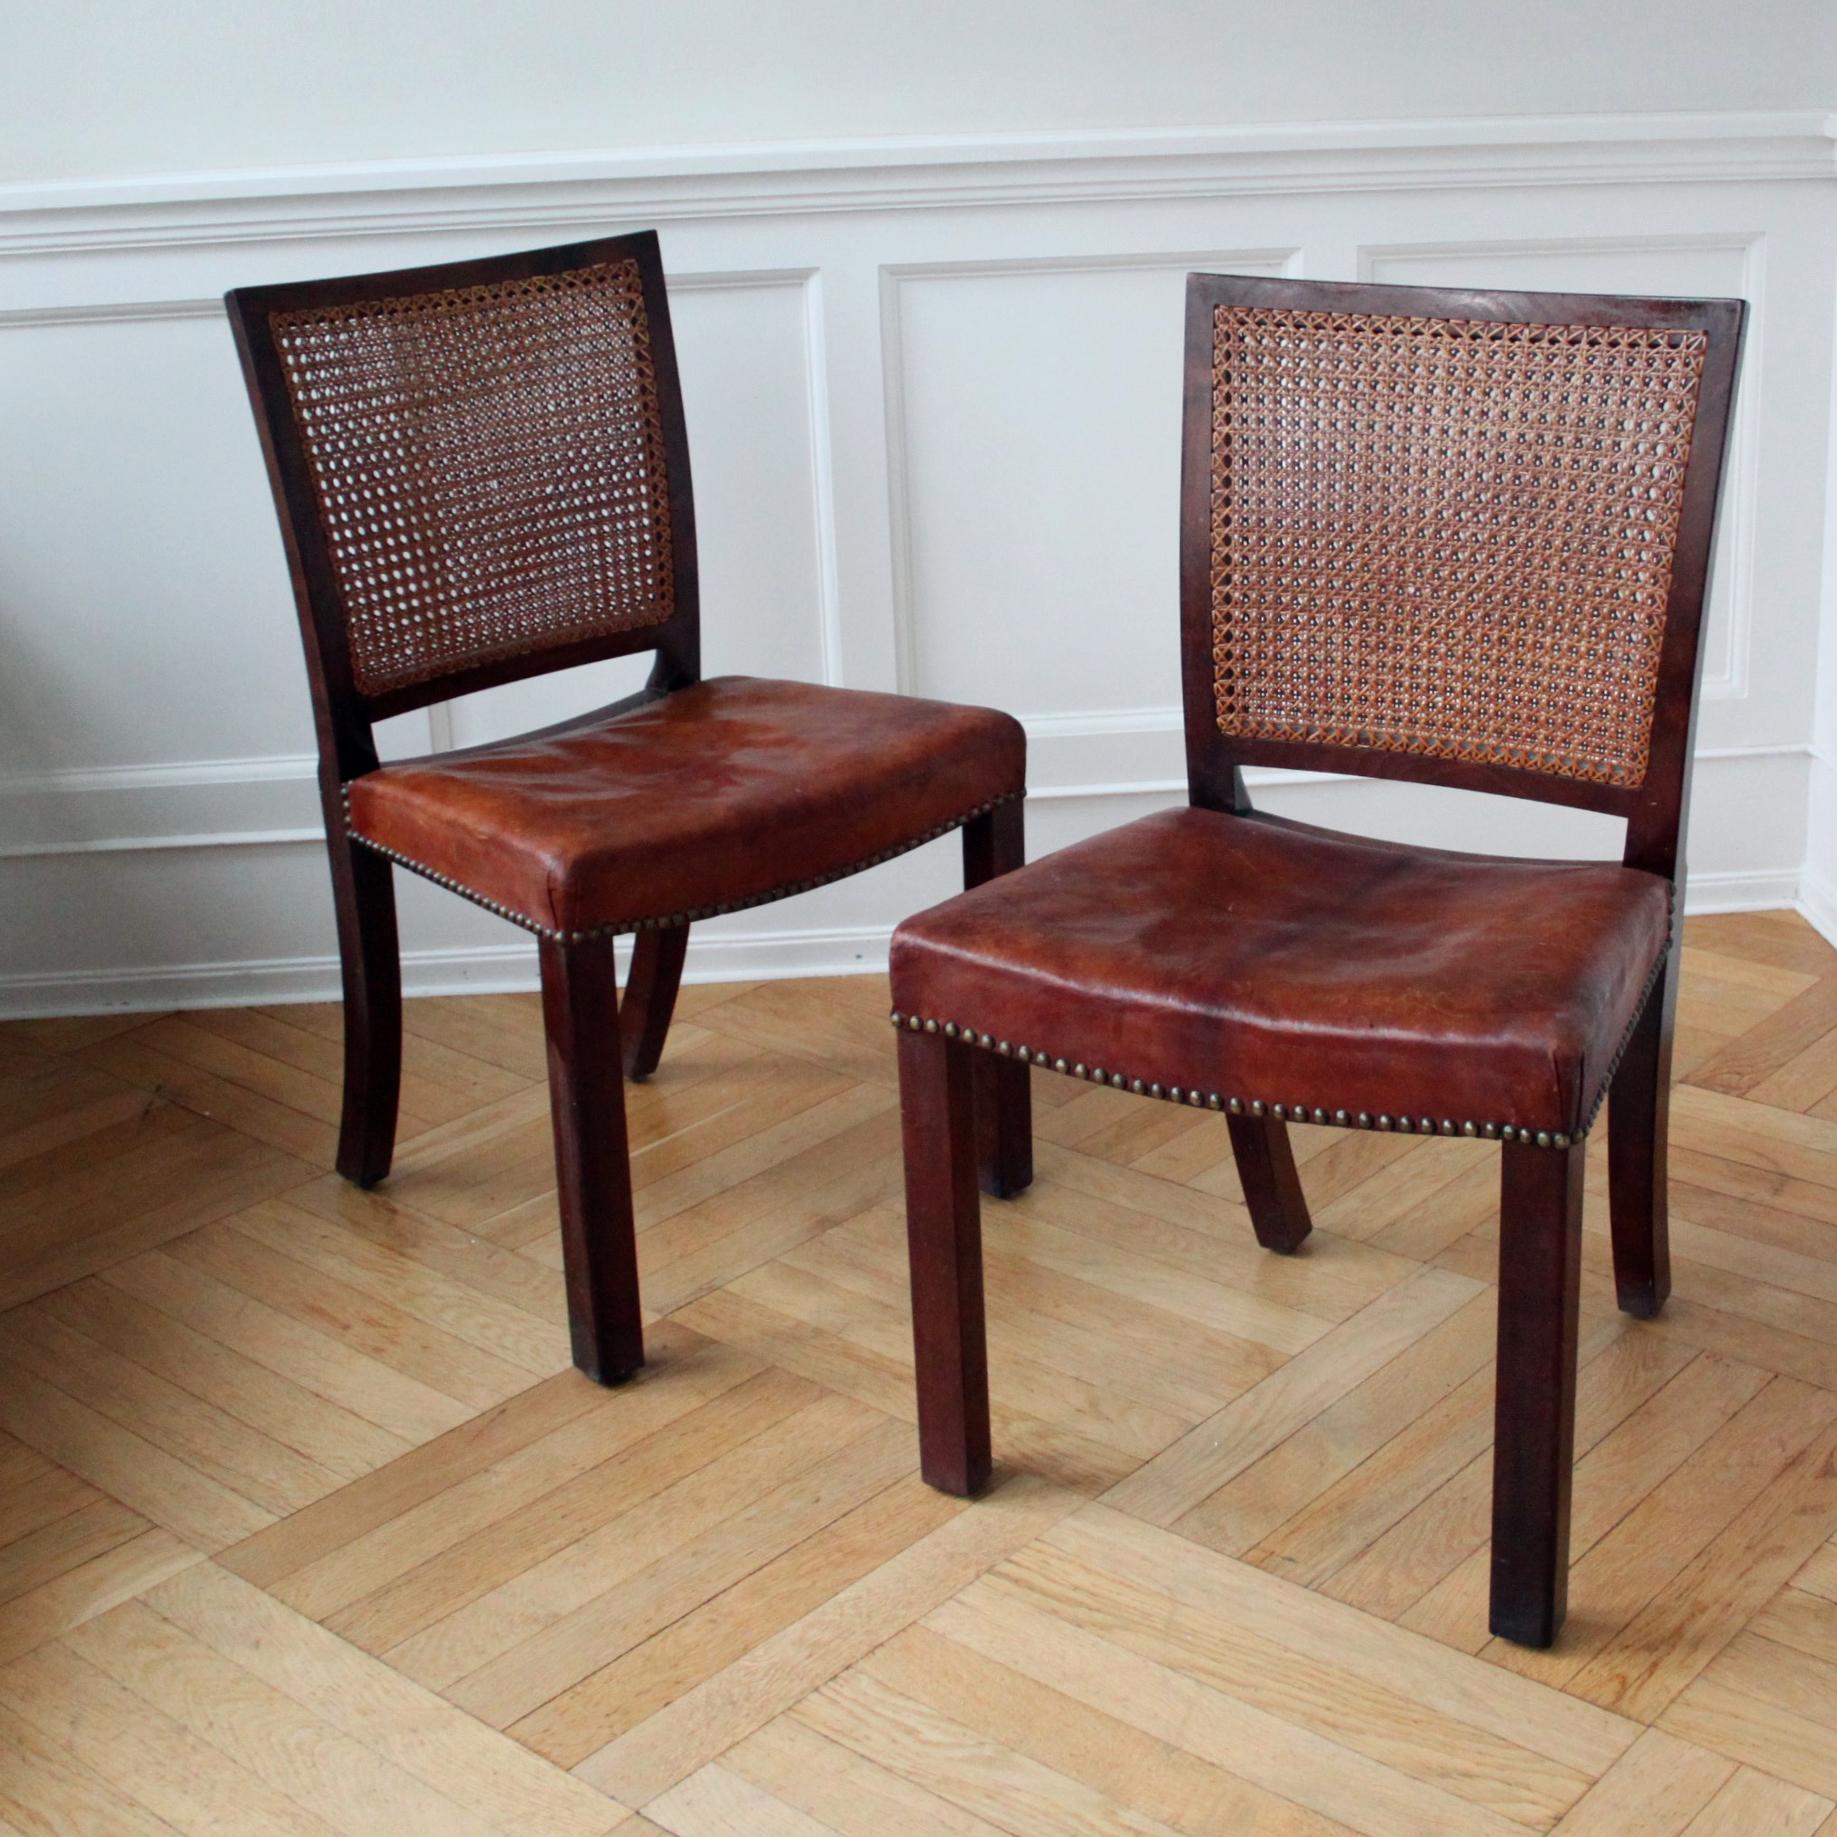 Danish Rare pair of Mahogany, Niger Leather and Woven Cane Chairs, Denmark 1930s For Sale